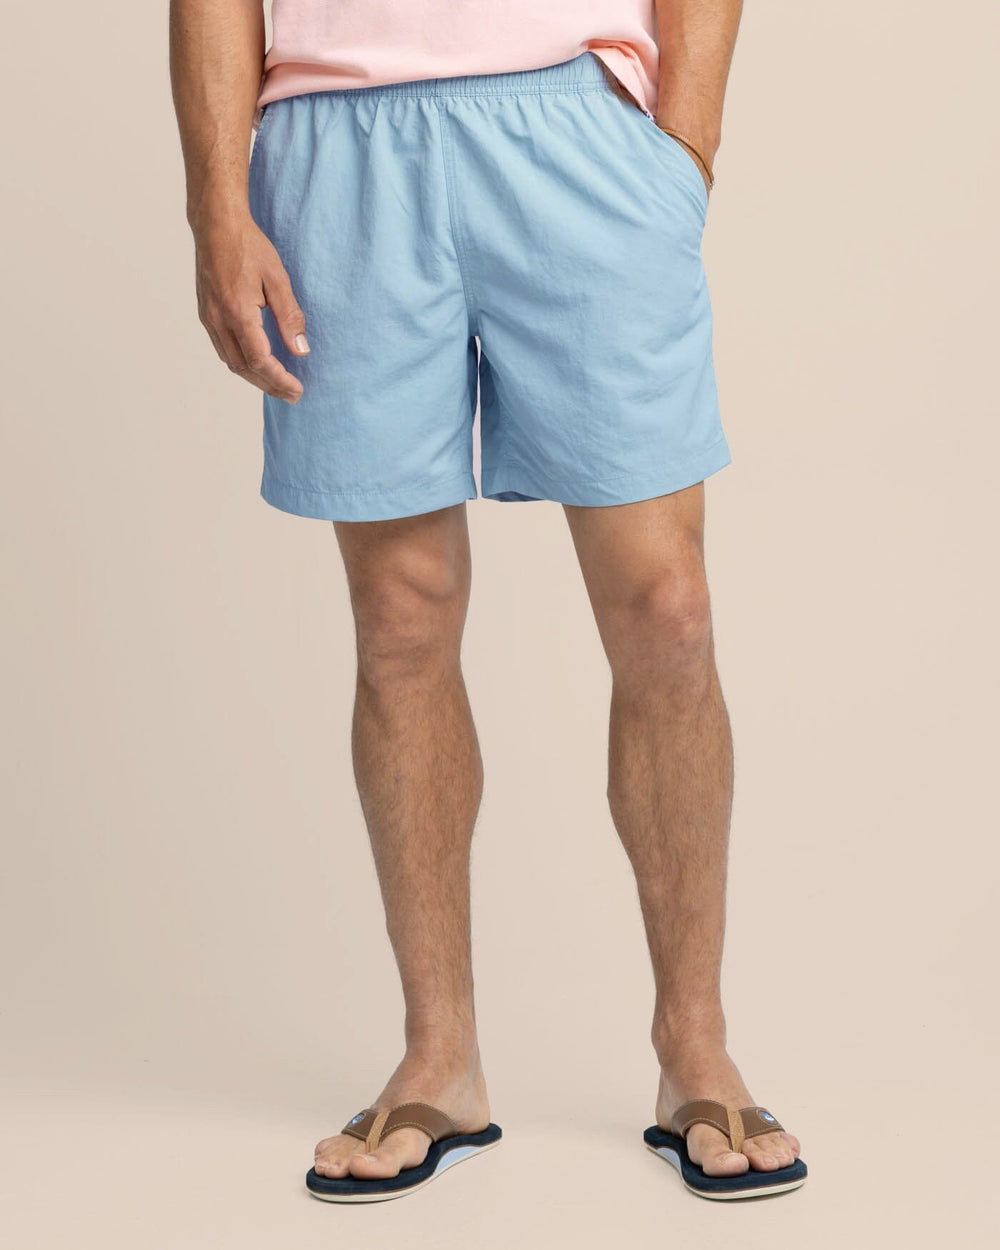 The front view of the Southern Tide Shoreline 6 Nylon Short by Southern Tide - Windward Blue